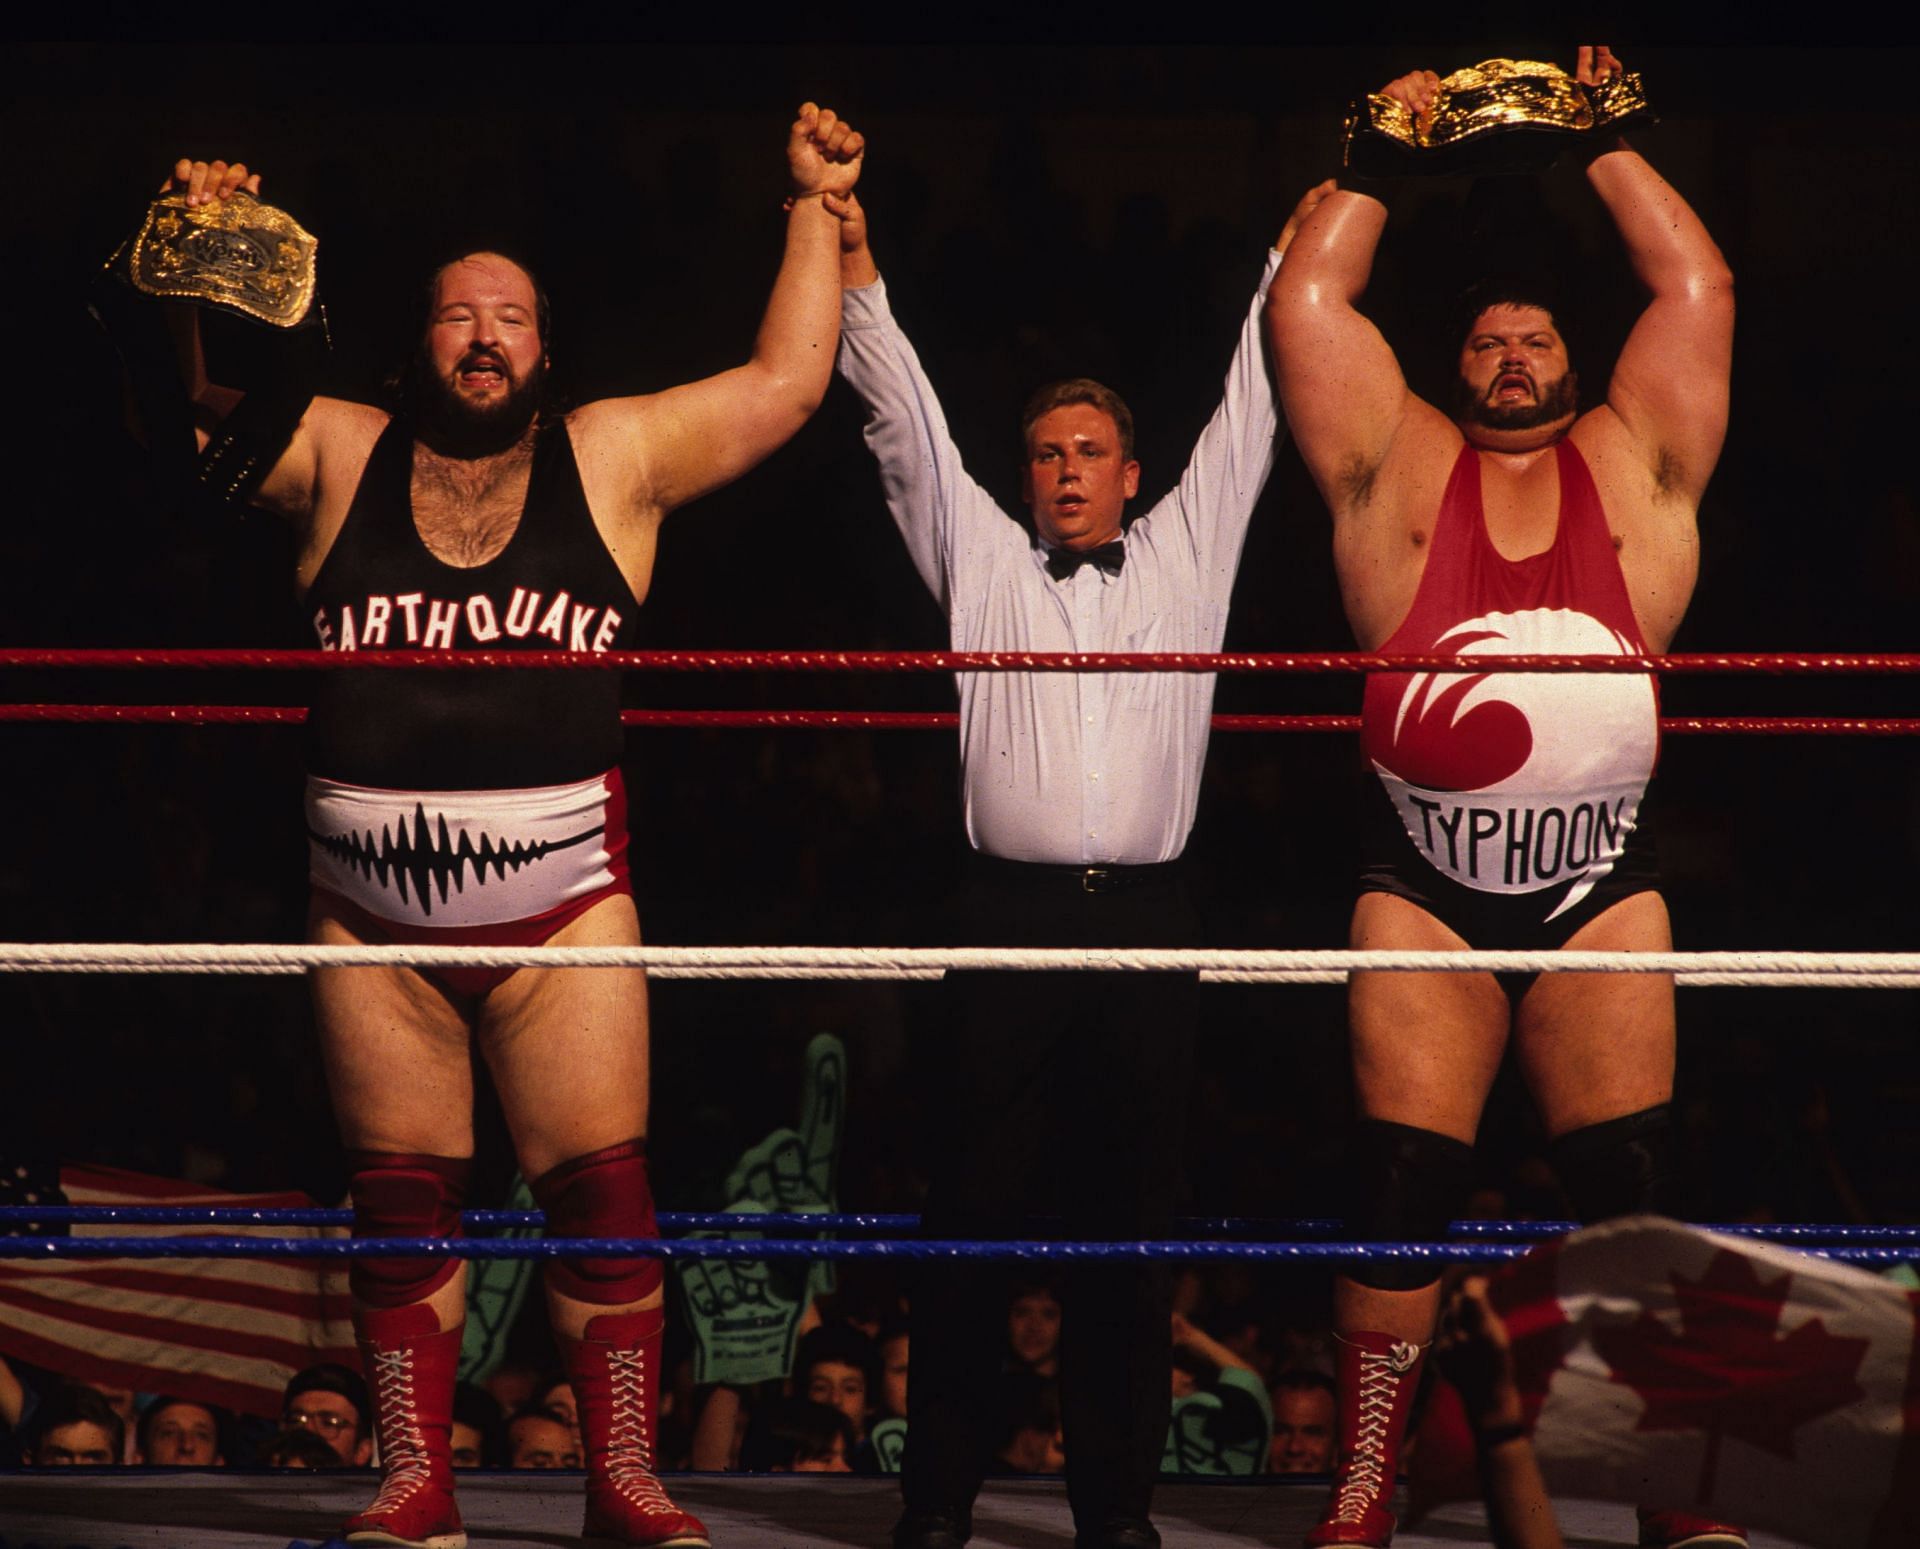 The Natural Disasters retained the WWF Tag Team Championship against the Beverly Brothers